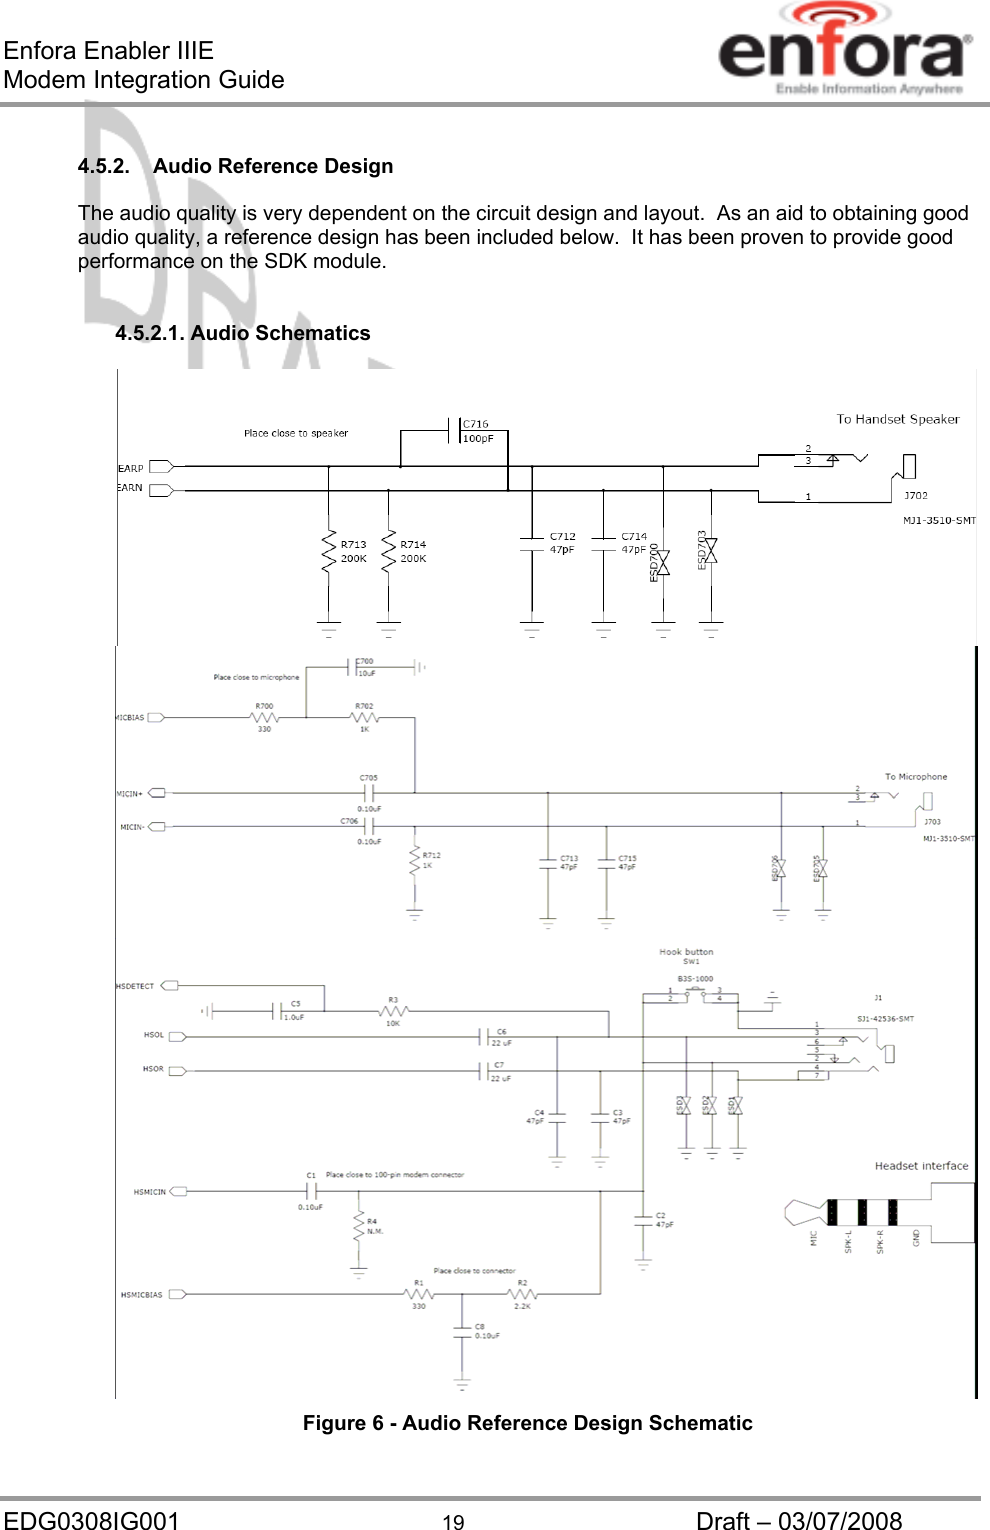 Enfora Enabler IIIE Modem Integration Guide  4.5.2.  Audio Reference Design  The audio quality is very dependent on the circuit design and layout.  As an aid to obtaining good audio quality, a reference design has been included below.  It has been proven to provide good performance on the SDK module.   4.5.2.1. Audio Schematics     Figure 6 - Audio Reference Design Schematic EDG0308IG001  19  Draft – 03/07/2008 